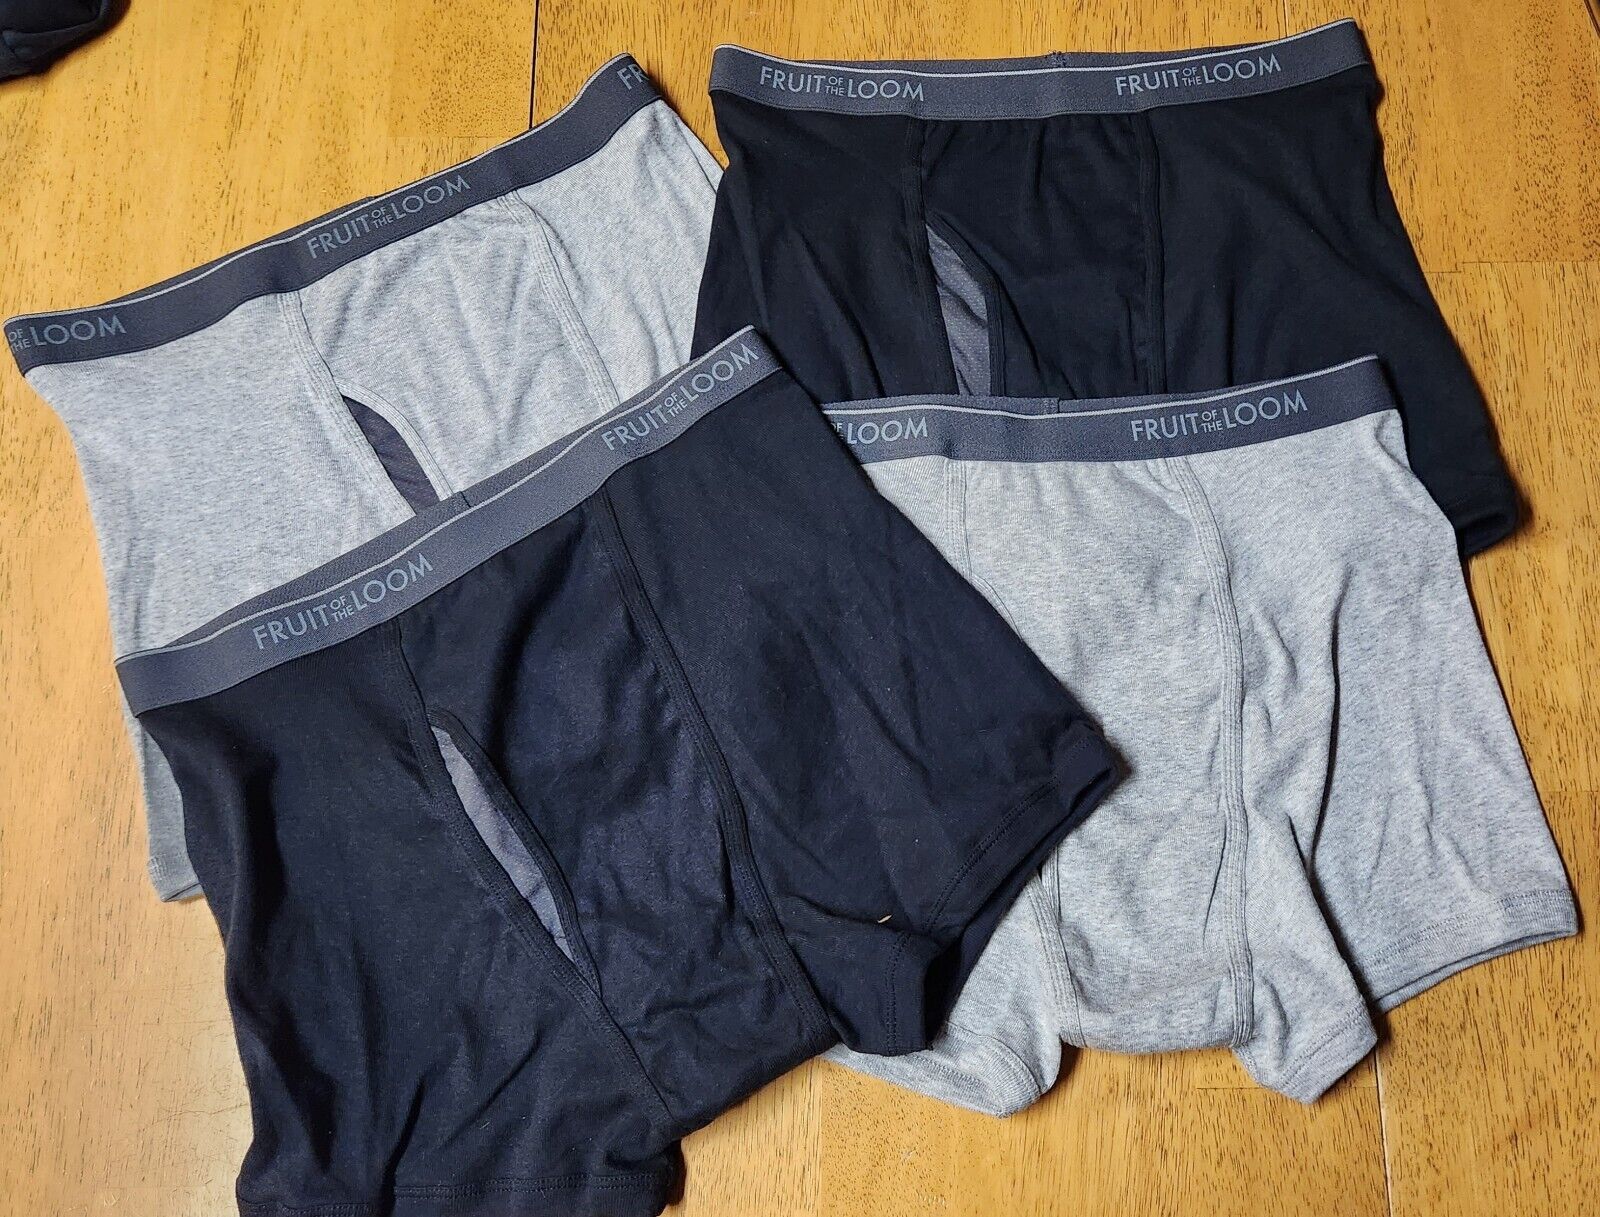 15 Amazing Fruit Of The Loom Briefs for 2023